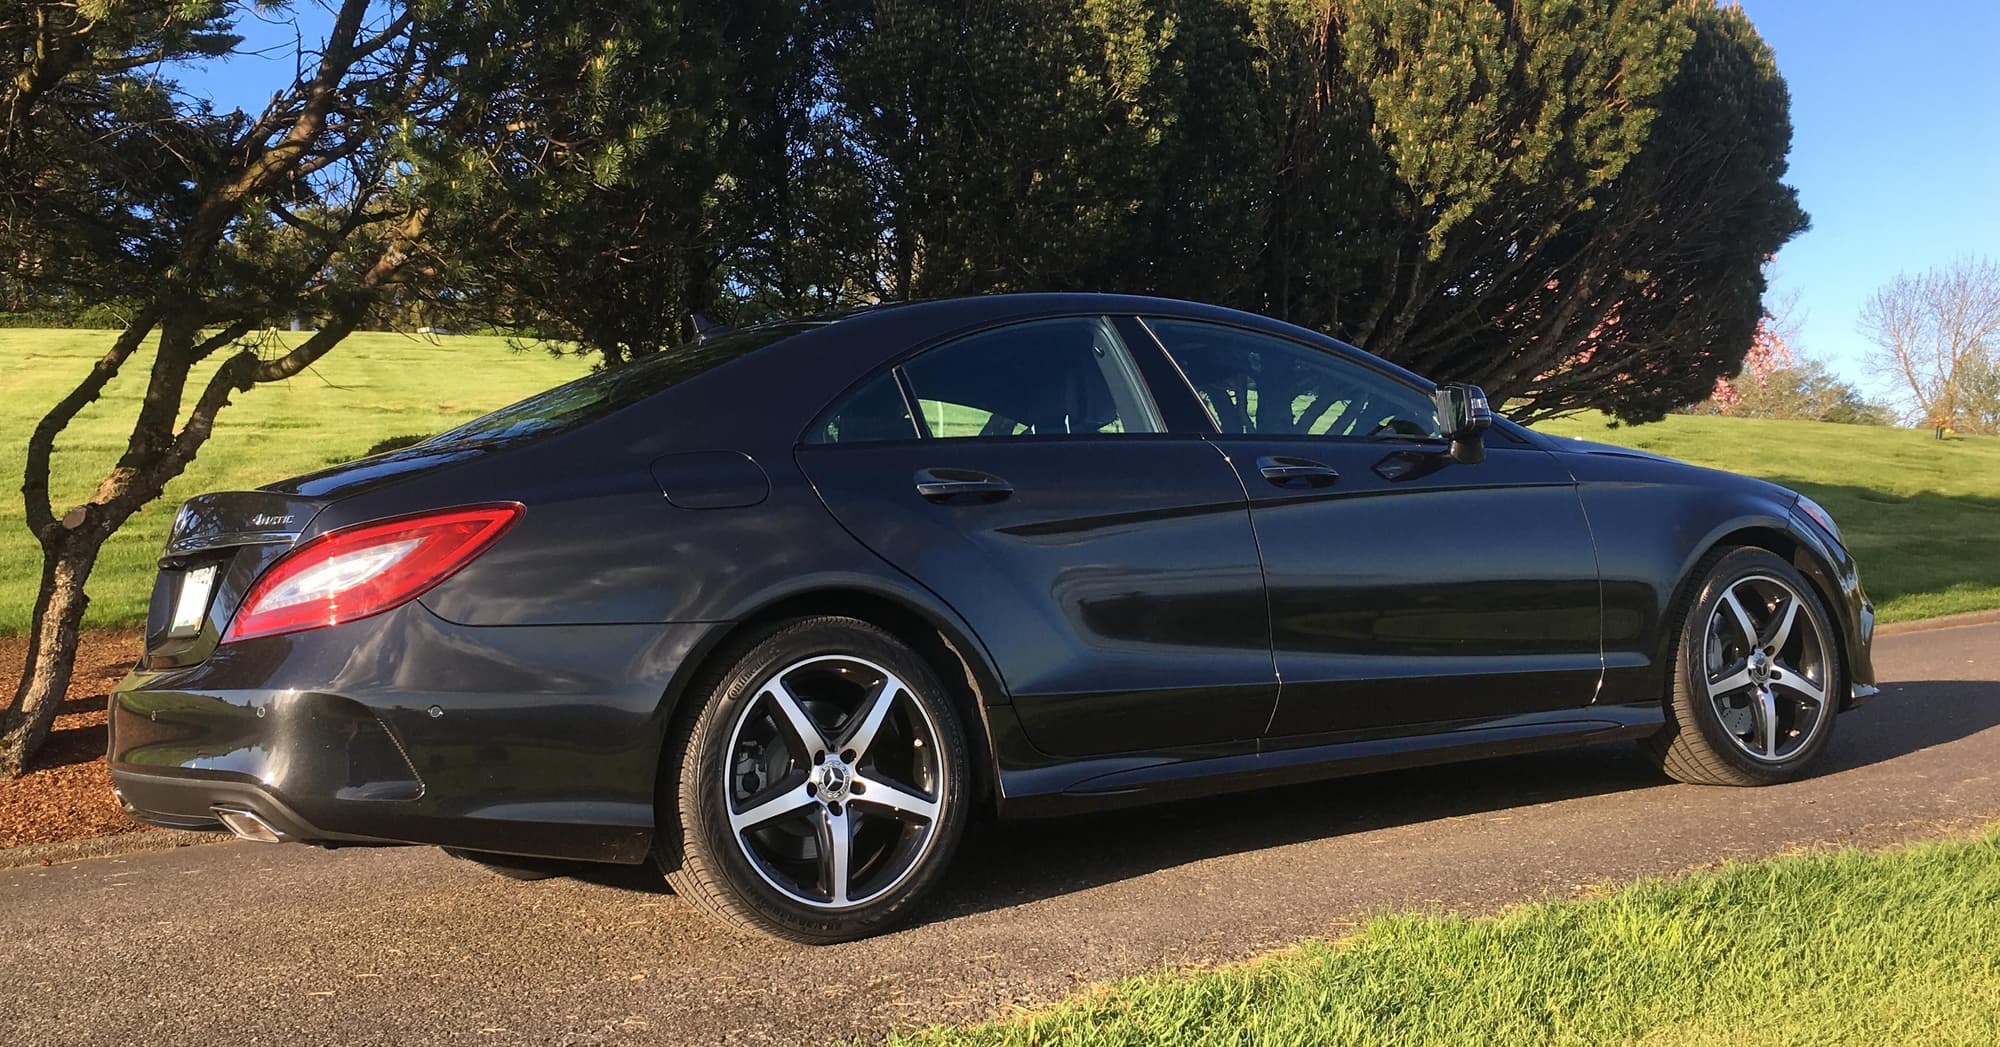 2017 Mercedes-Benz CLS550 - 2017 CLS550 4Matic - Magnetite Black (Lease Transfer option) - Used - VIN WDDLJ9BB6HA196812 - 14,000 Miles - 8 cyl - AWD - Automatic - Coupe - Black - Beaverton, OR 97007, United States